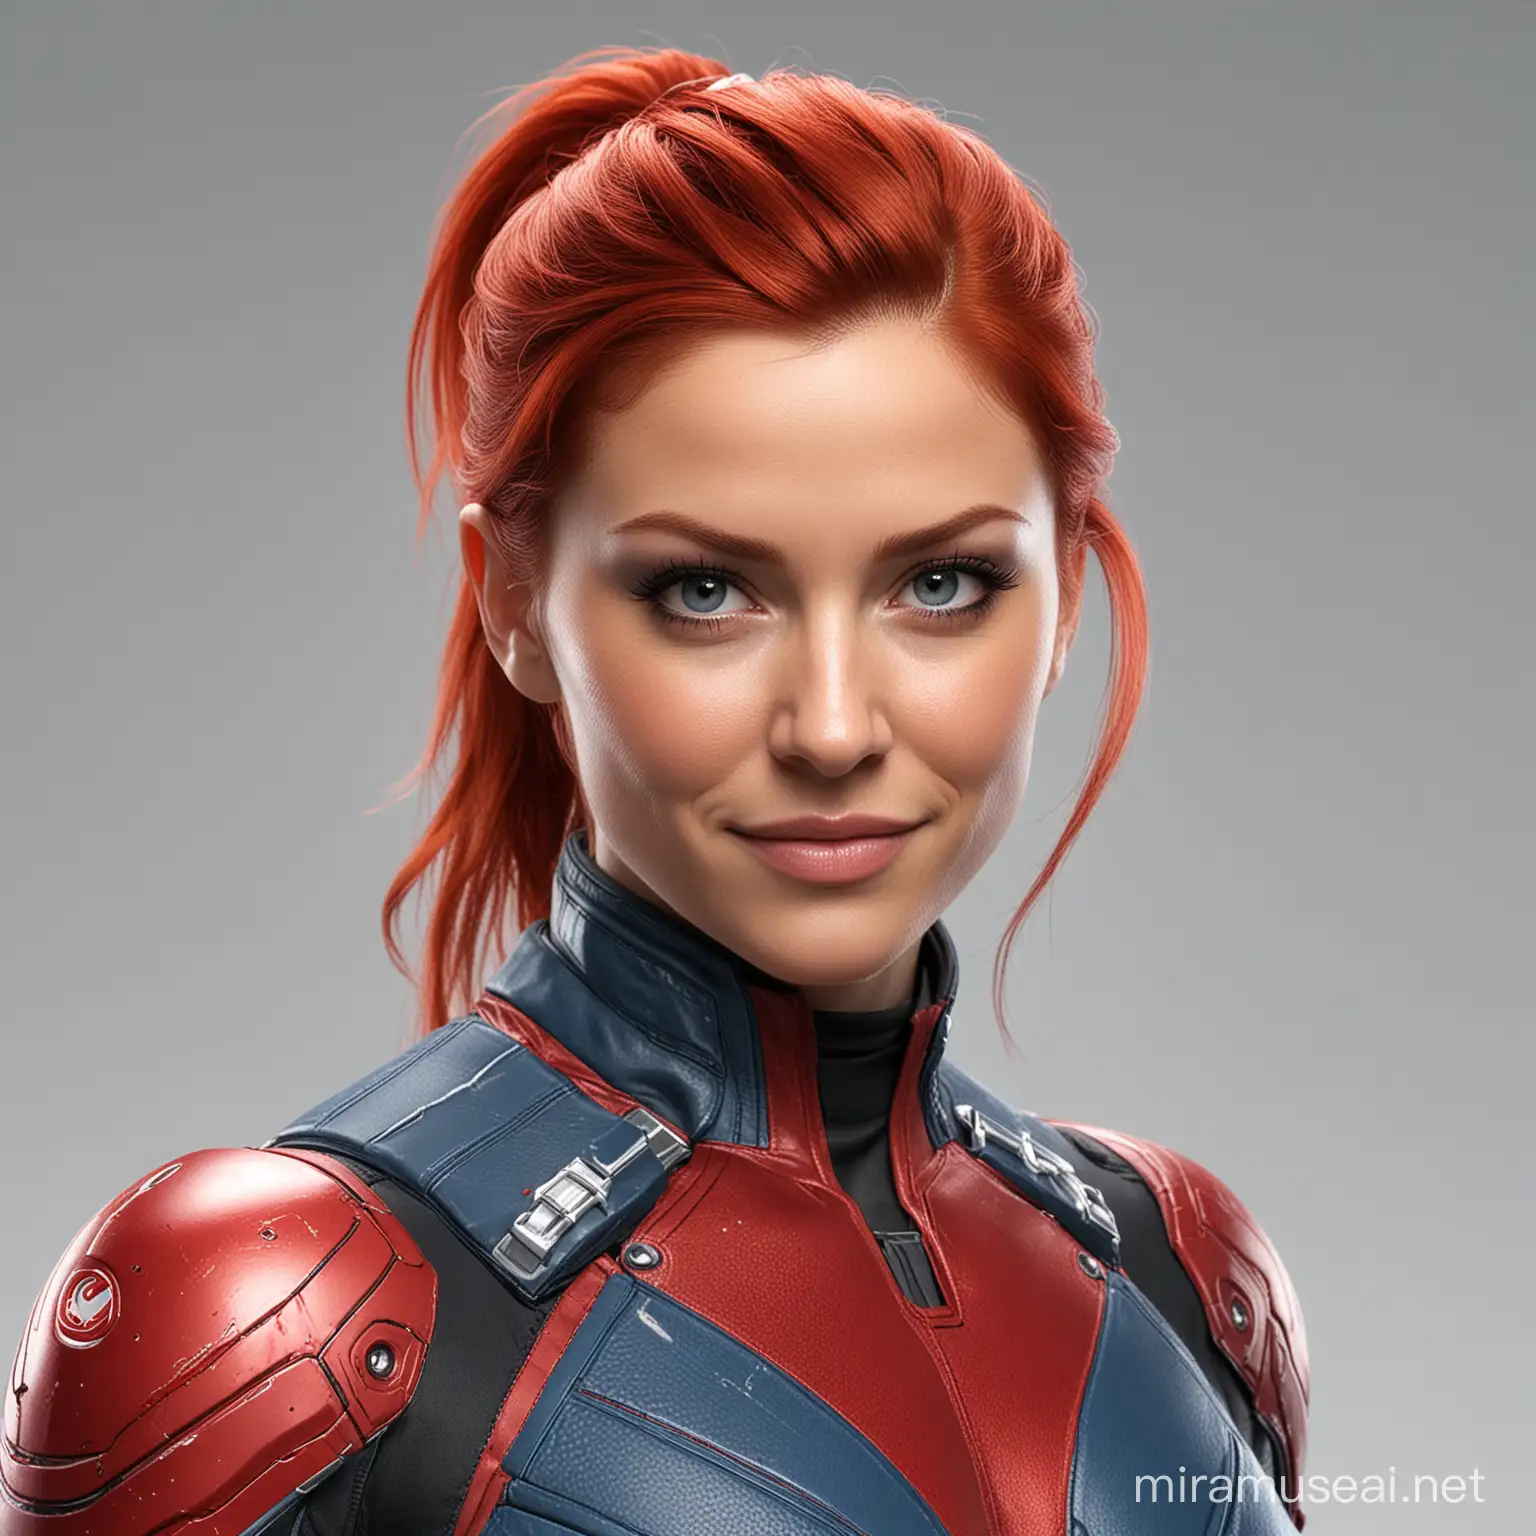 Futuristic RedHaired Smiling Character Portrait in Blue and Red Attire